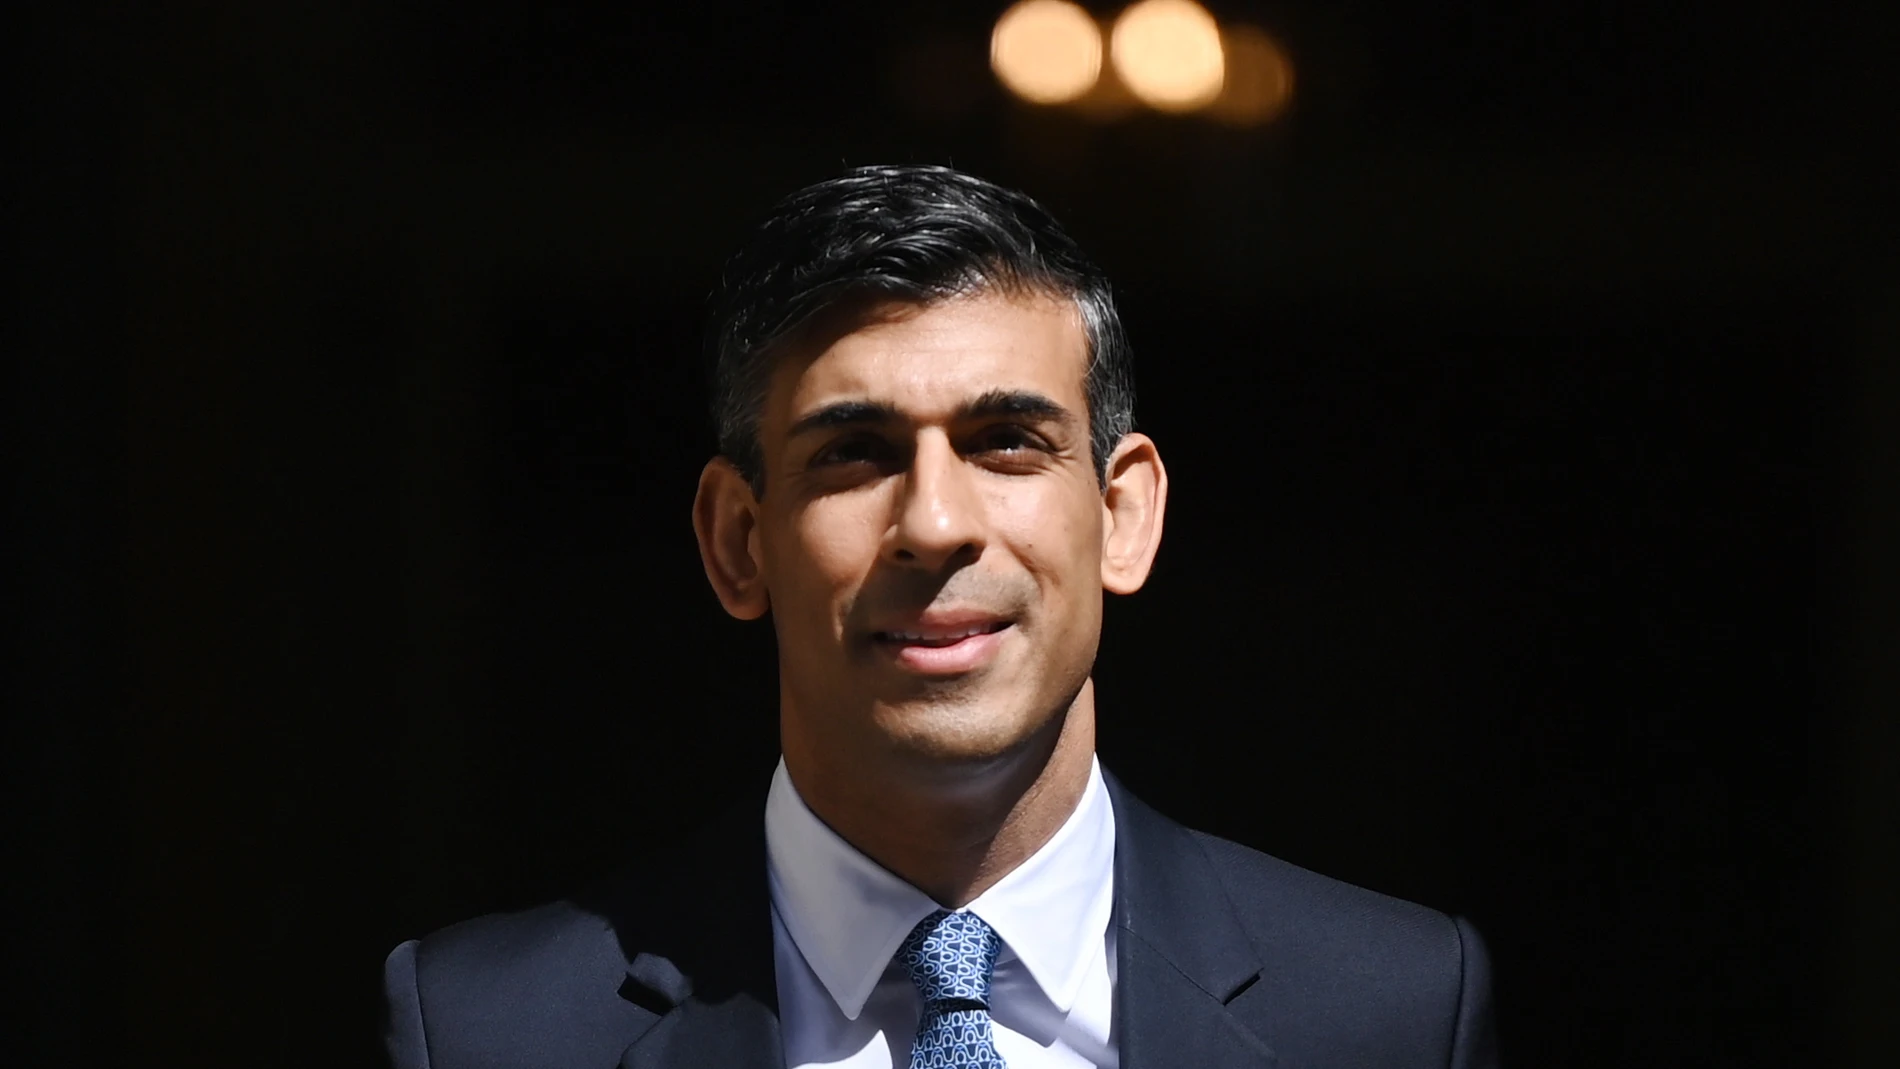 London (United Kingdom), 03/05/2023.- British Prime Minister Rishi Sunak departs 10 Downing Street for Prime Ministers Questions at parliament in London, Britain, 03 May 2023. (Reino Unido, Londres) EFE/EPA/ANDY RAIN
